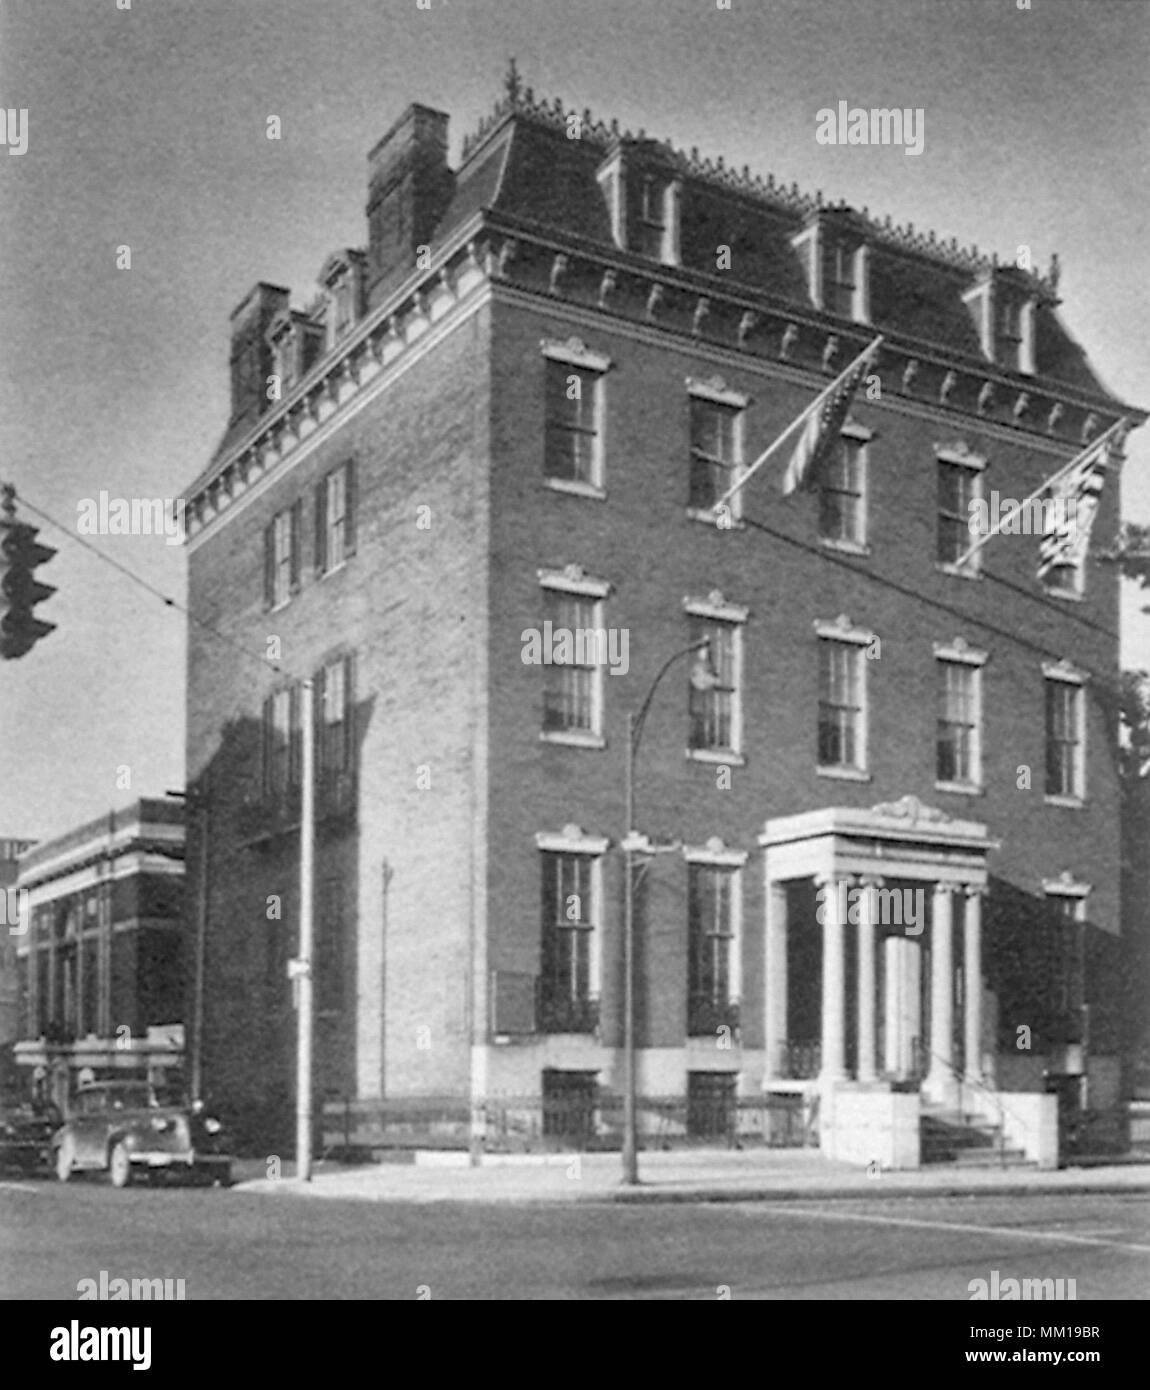 Le Maryland Historical Society. Baltimore. 1930 Banque D'Images